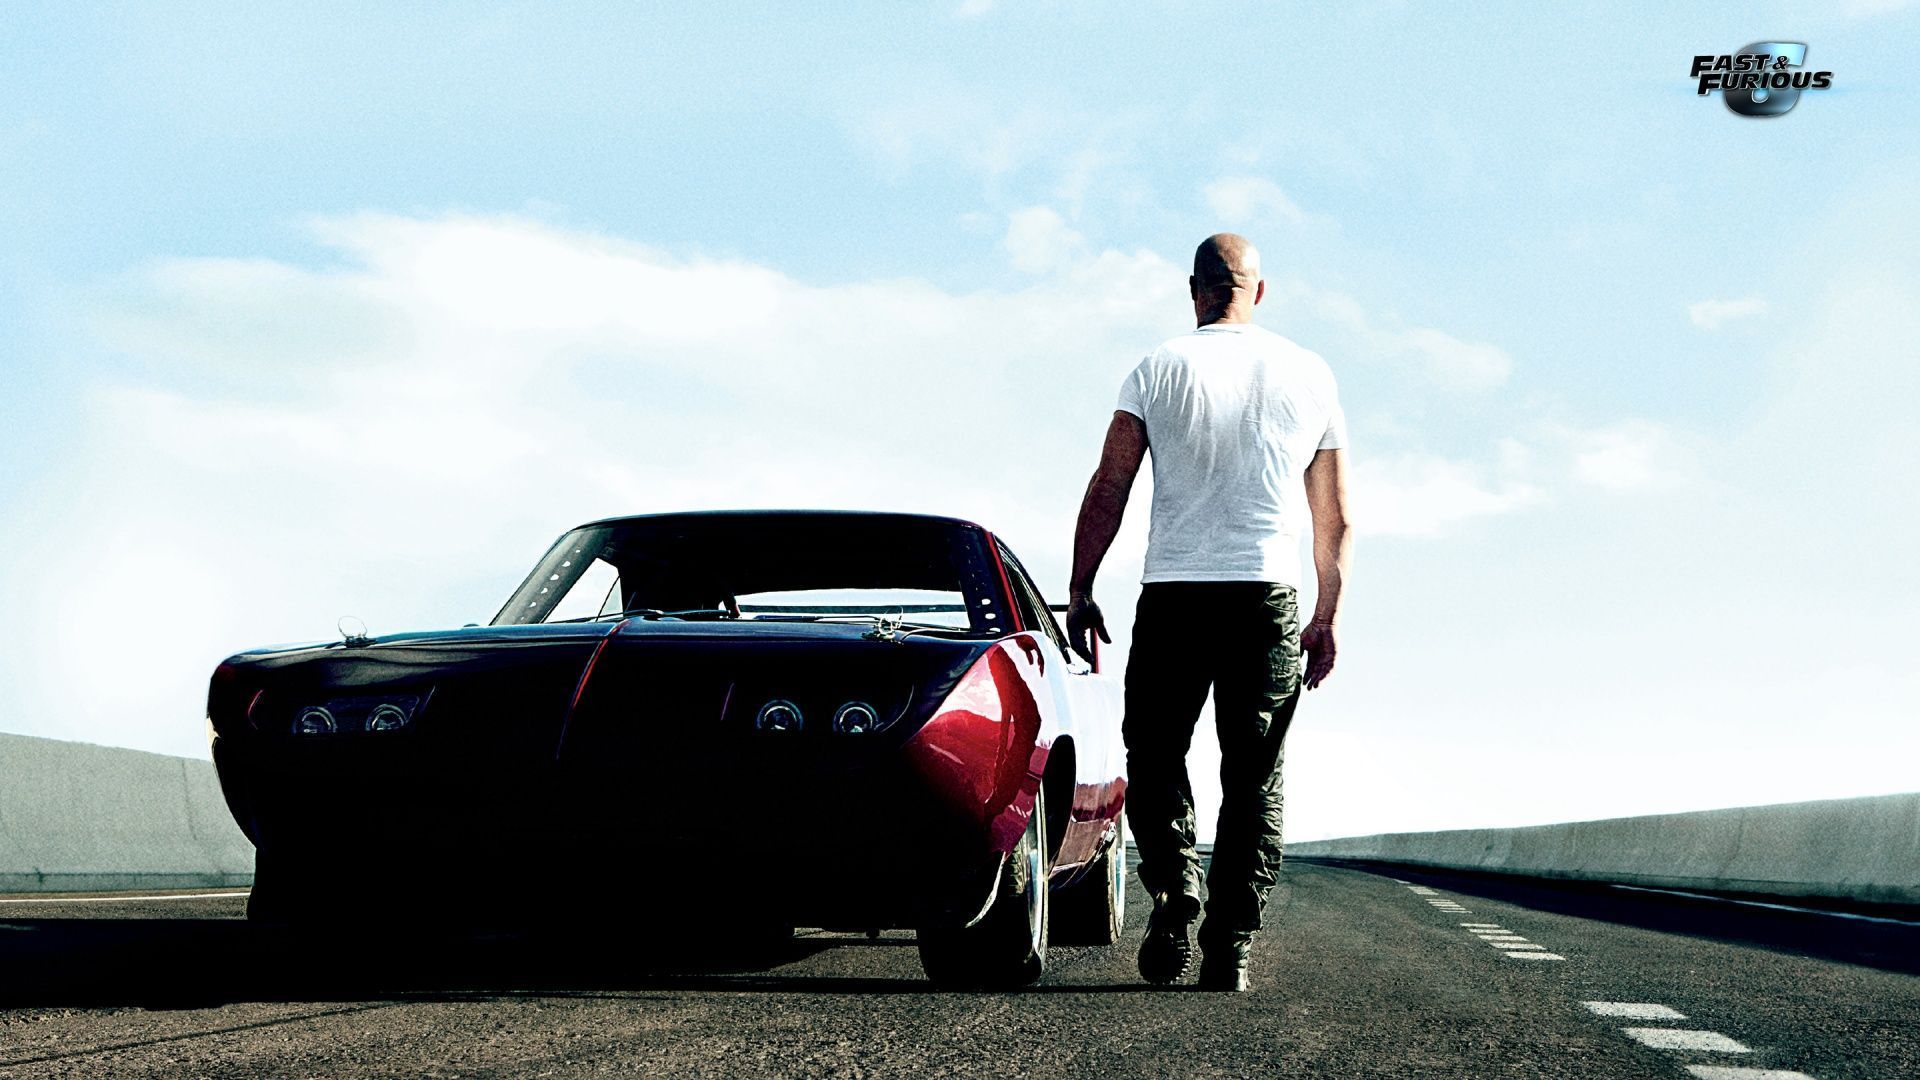 1920x1080 Fast and furious 6 movie Wallpaper